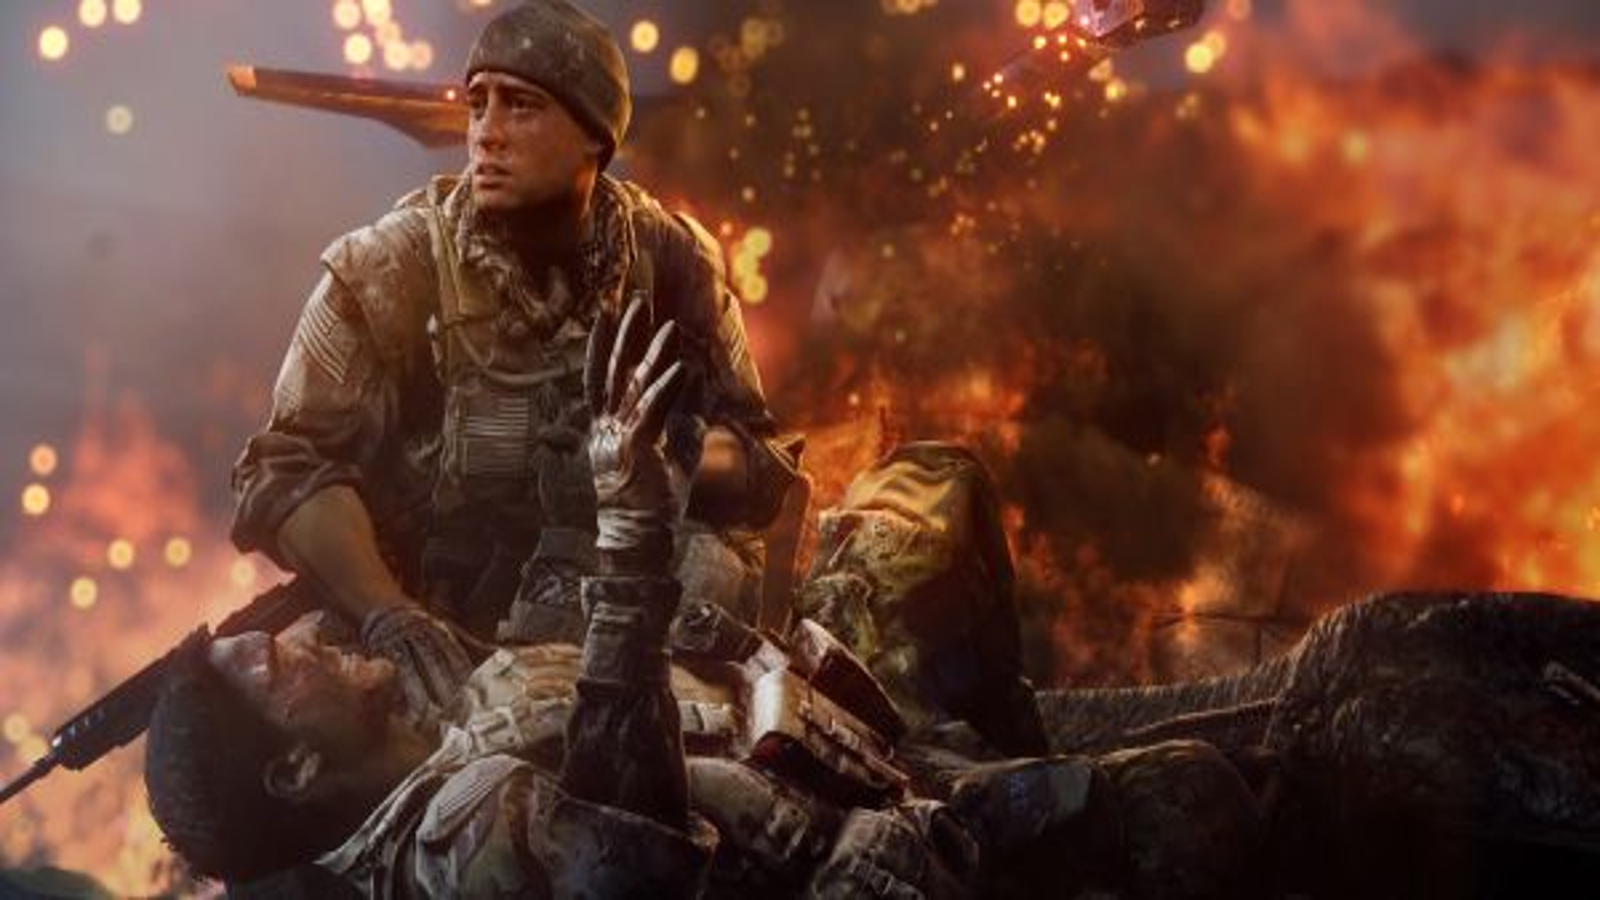 Battlefield 4 confirmed for Xbox One, PS4